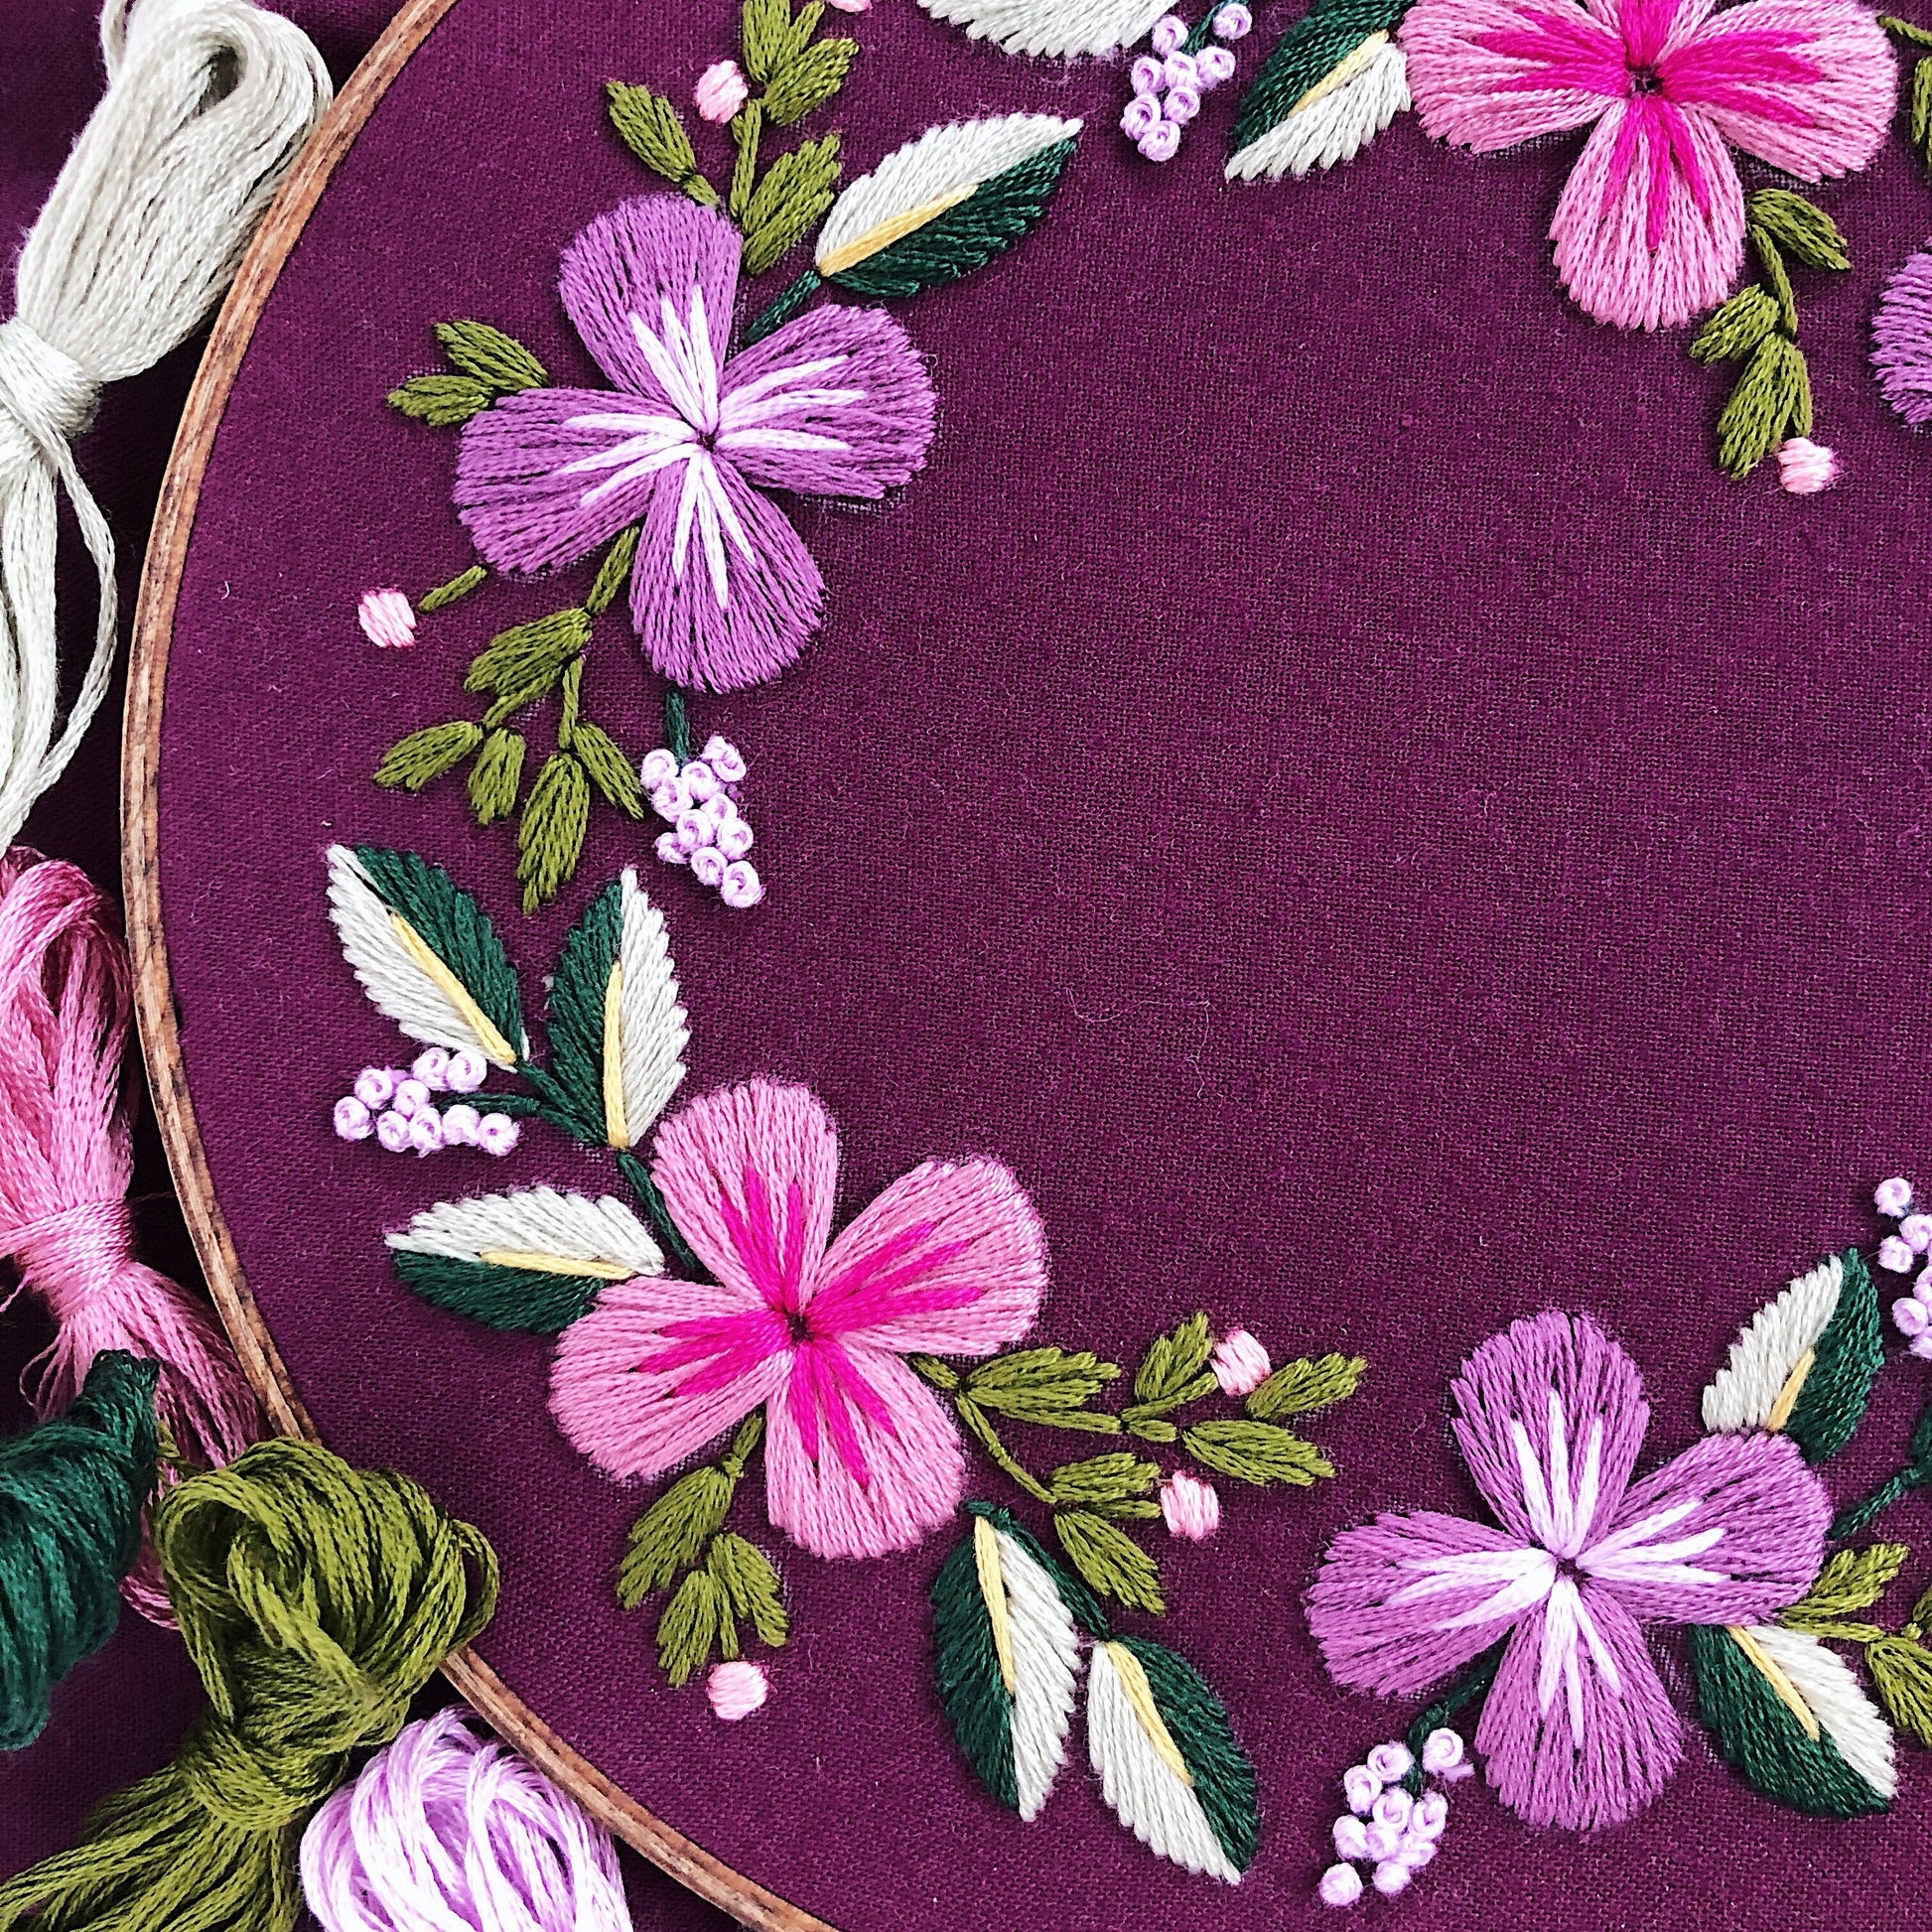 Purple Floral Wreath Embroidery Pattern. Beginner Embroidery. PDF embroidery pattern. 7" hoop. Flower Embroidery pattern.  DIY embroidery